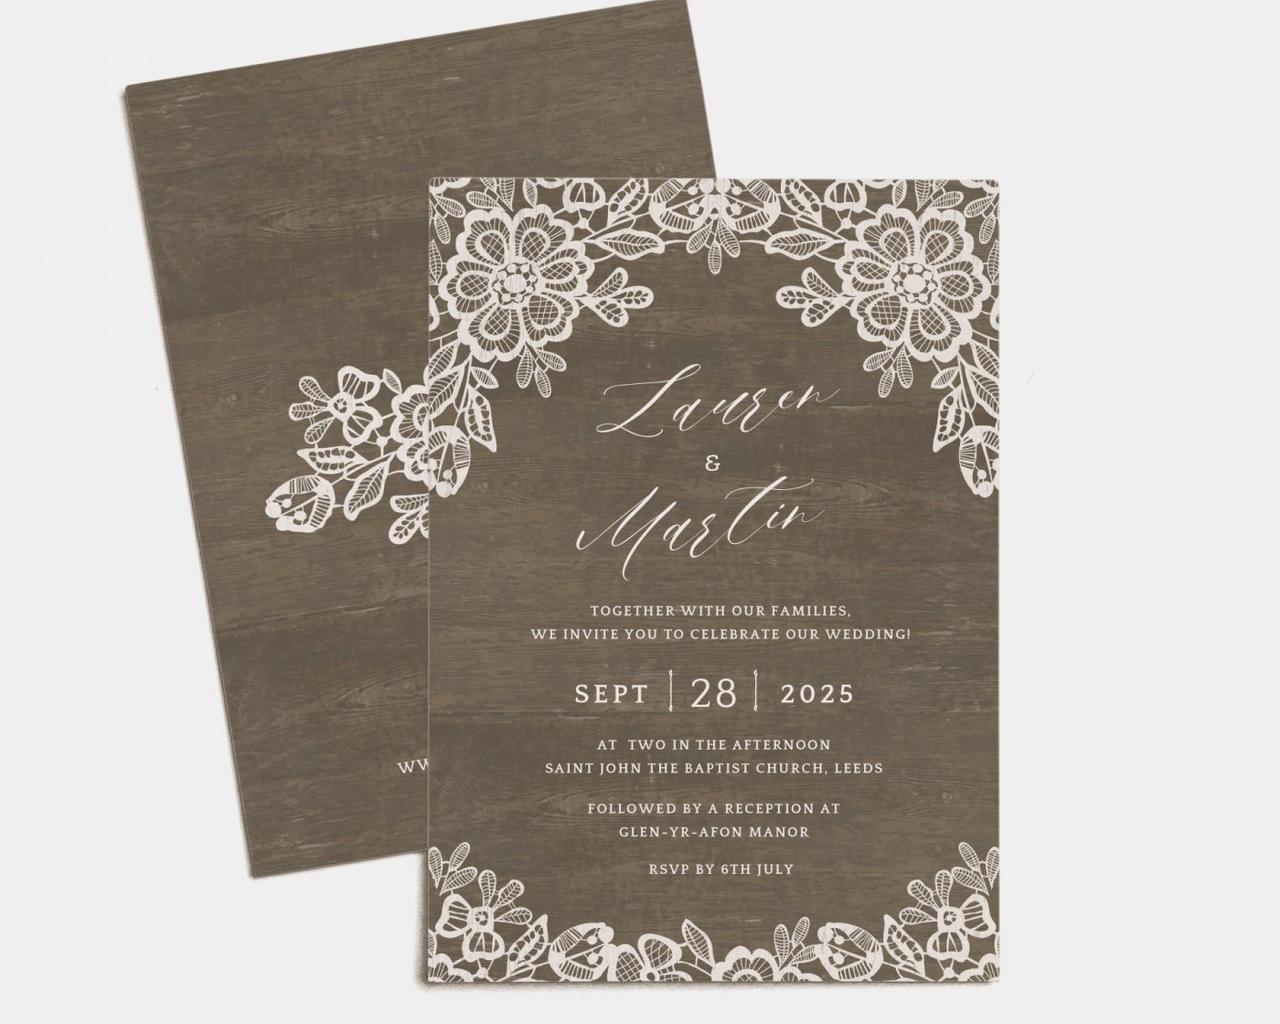 PERSONALISED WEDDING INVITATIONS RUSTIC WOOD EFFECT ROSE & LACE BUNTING 10 